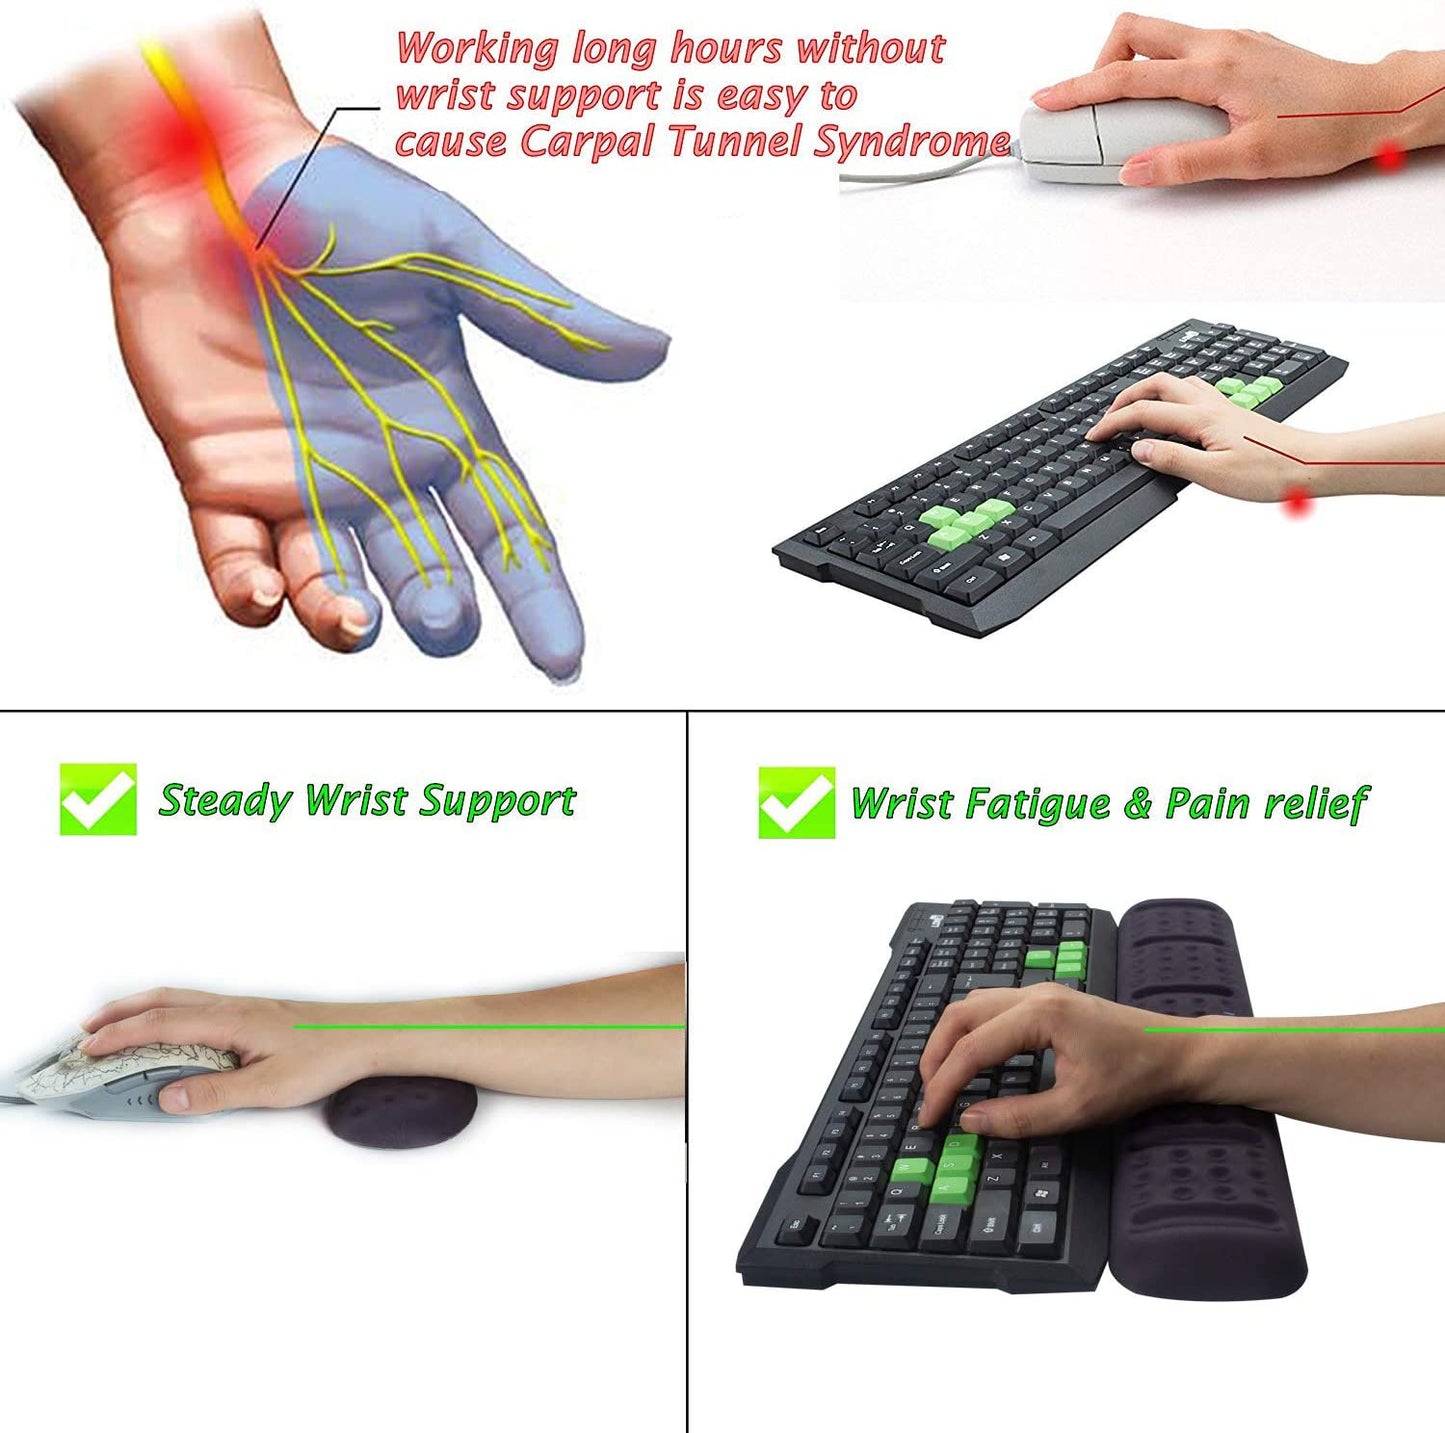 BRILA Upgraded Ergonomic Keyboard and Mouse Wrist Rest Support Cushion Pad Set - Comfy Soft Memory Foam Gel Padding & Non-Slip Palm/Hand/Wrist Pain Relief Rest Pad for Office Work, PC Gaming, Laptop